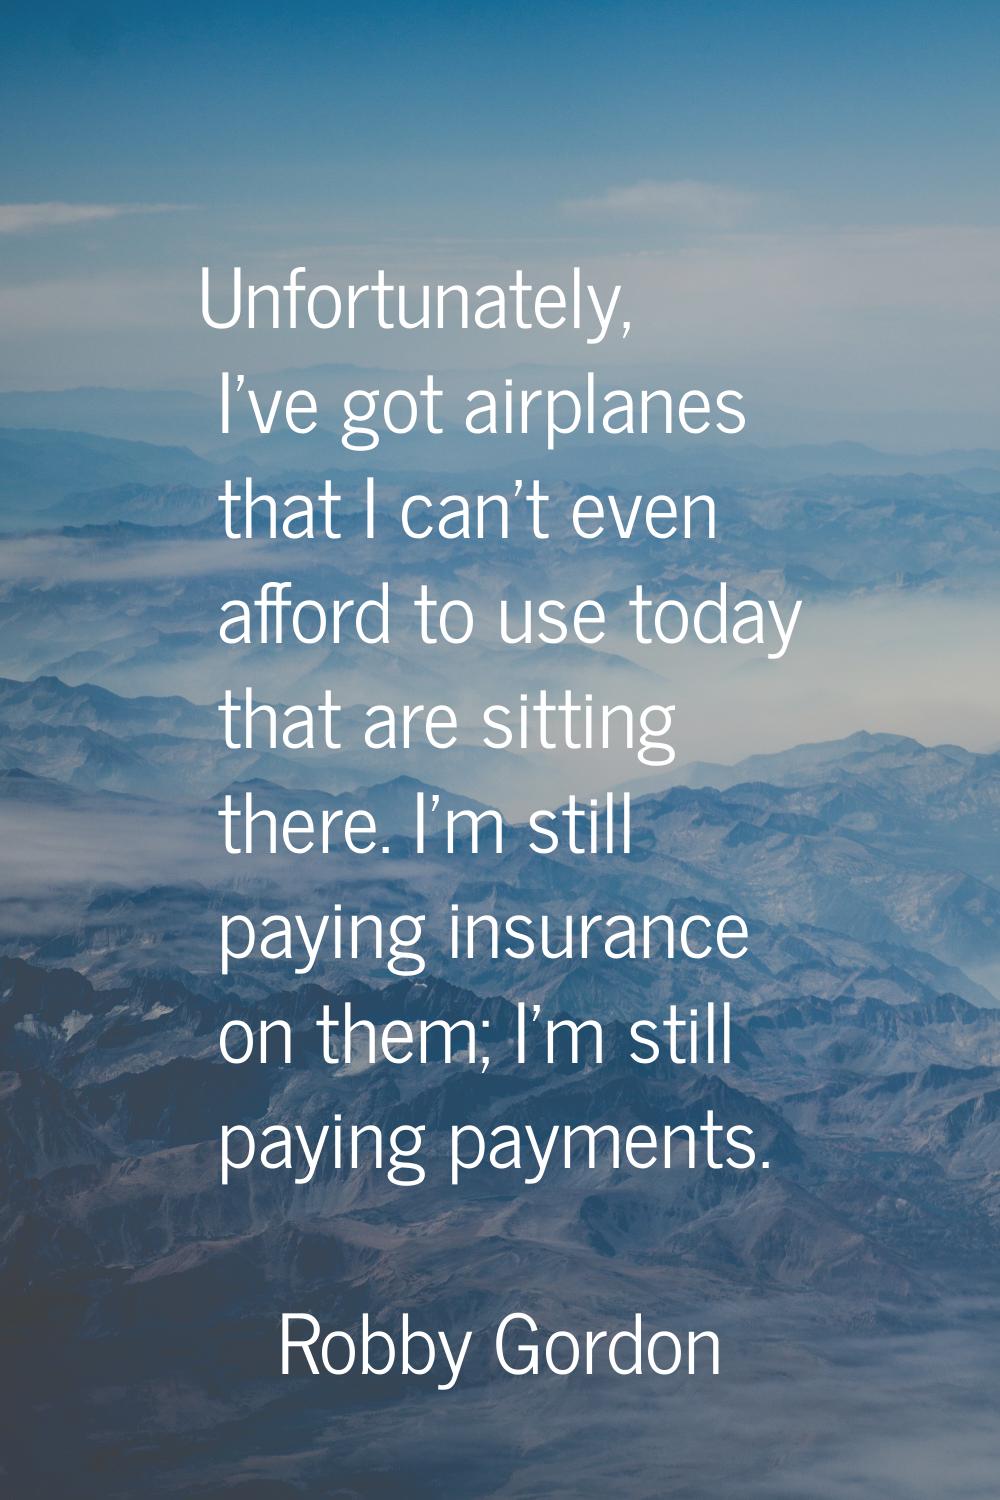 Unfortunately, I've got airplanes that I can't even afford to use today that are sitting there. I'm